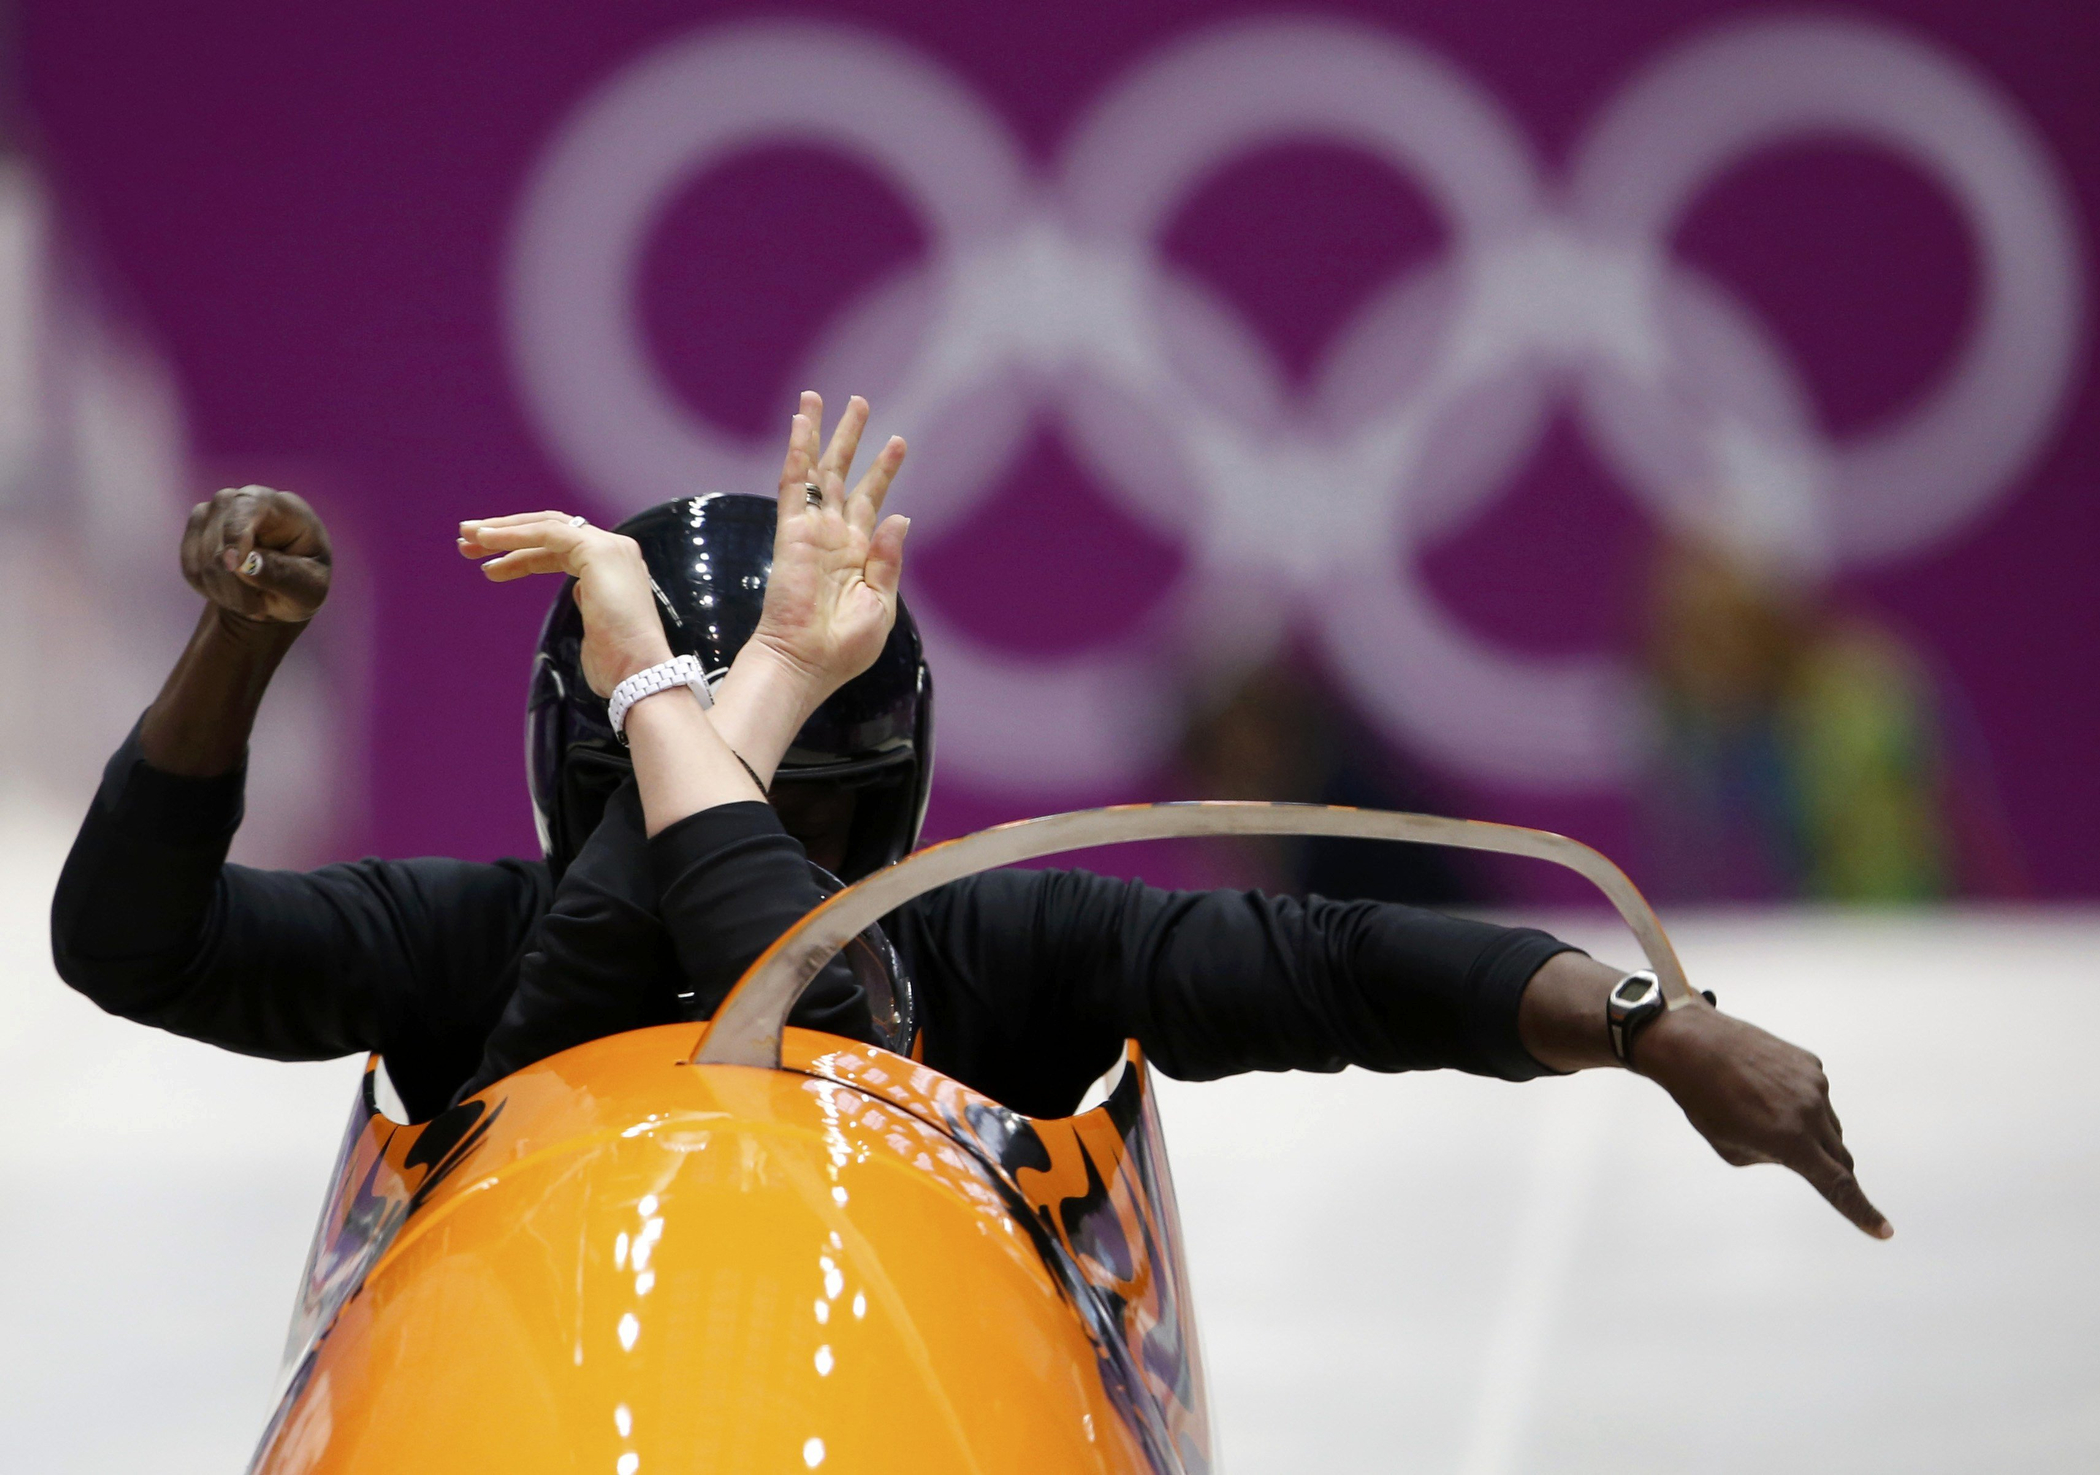 Pilot Esme Kamphuis (front) of the Netherlands starts a two-women bobsleigh training event at the Sanki Sliding Center in Rosa Khutor, a venue for the Sochi 2014 Winter Olympics, near Sochi, Feb. 14, 2014.